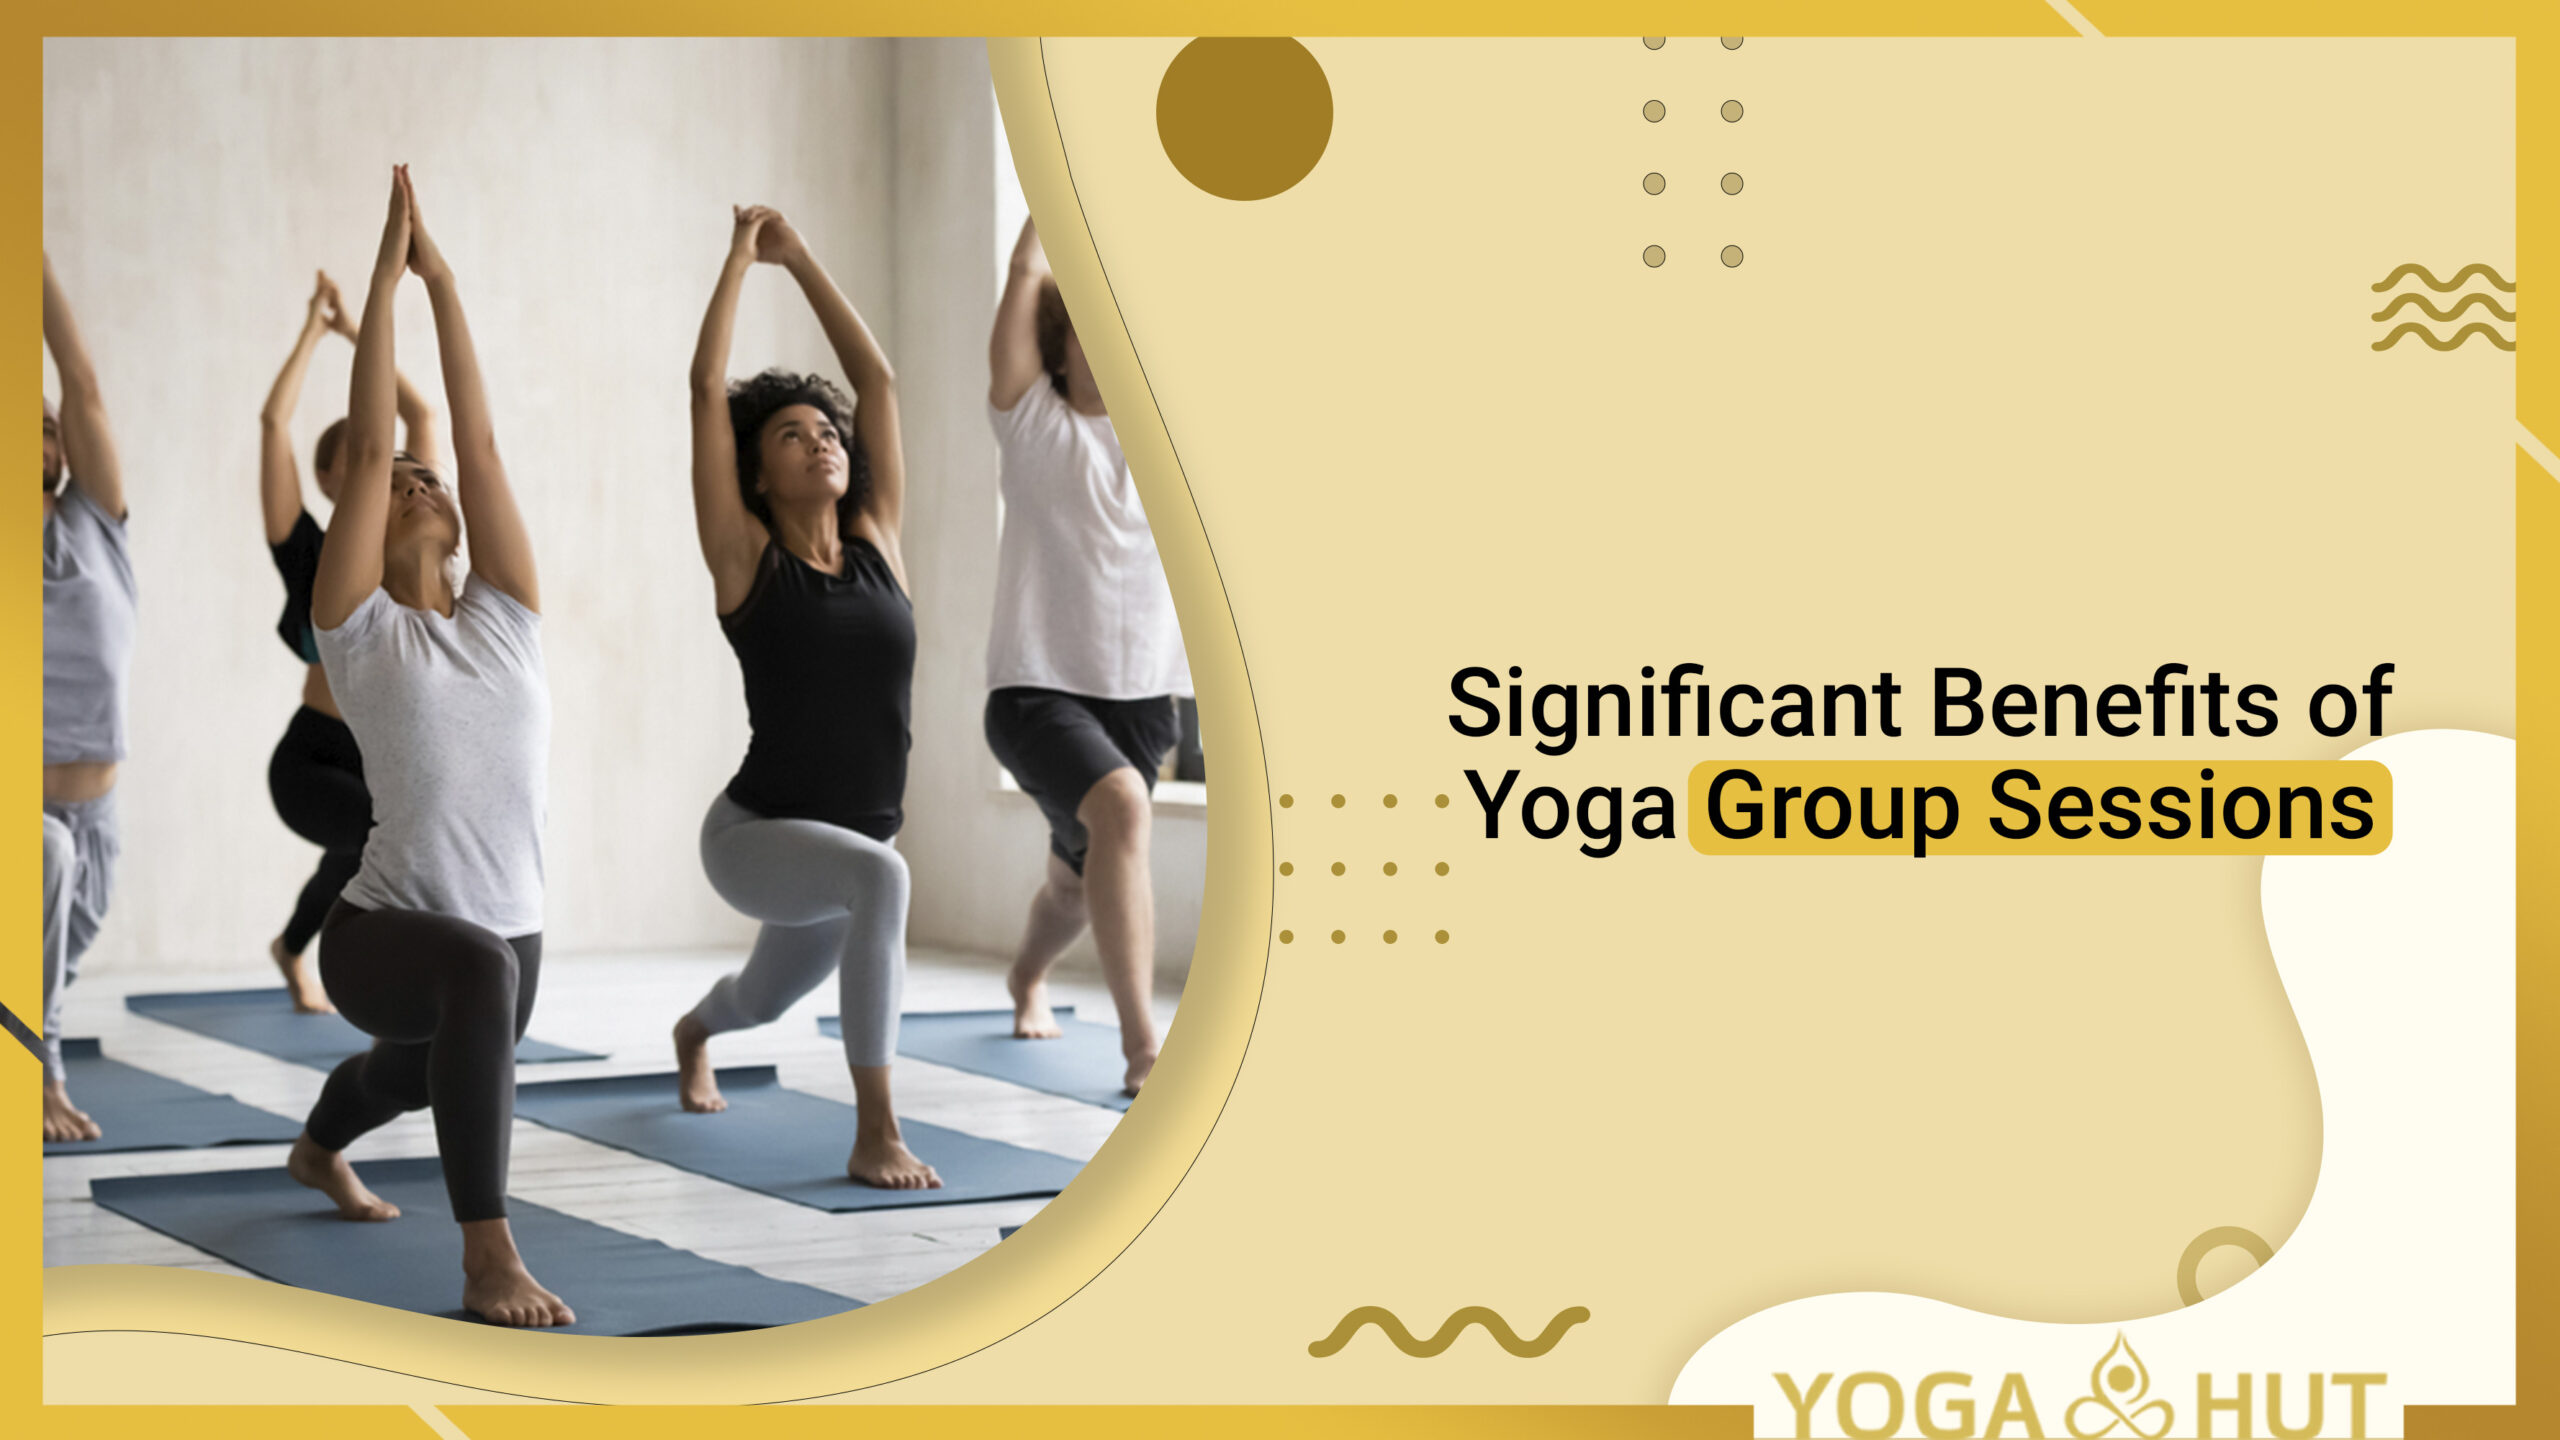 Significant Benefits of Yoga Group Sessions